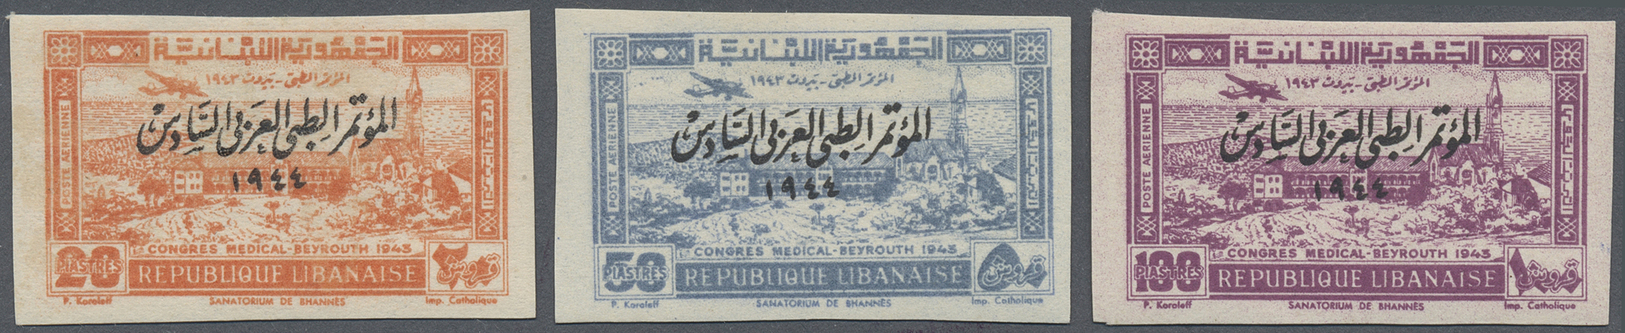 * Libanon: 1943, Medical Congress Beiruth 1944 Complete Set Of 3 Imperf Air Mail Values, Mint Light Hinged, Very Fine, A - Lebanon